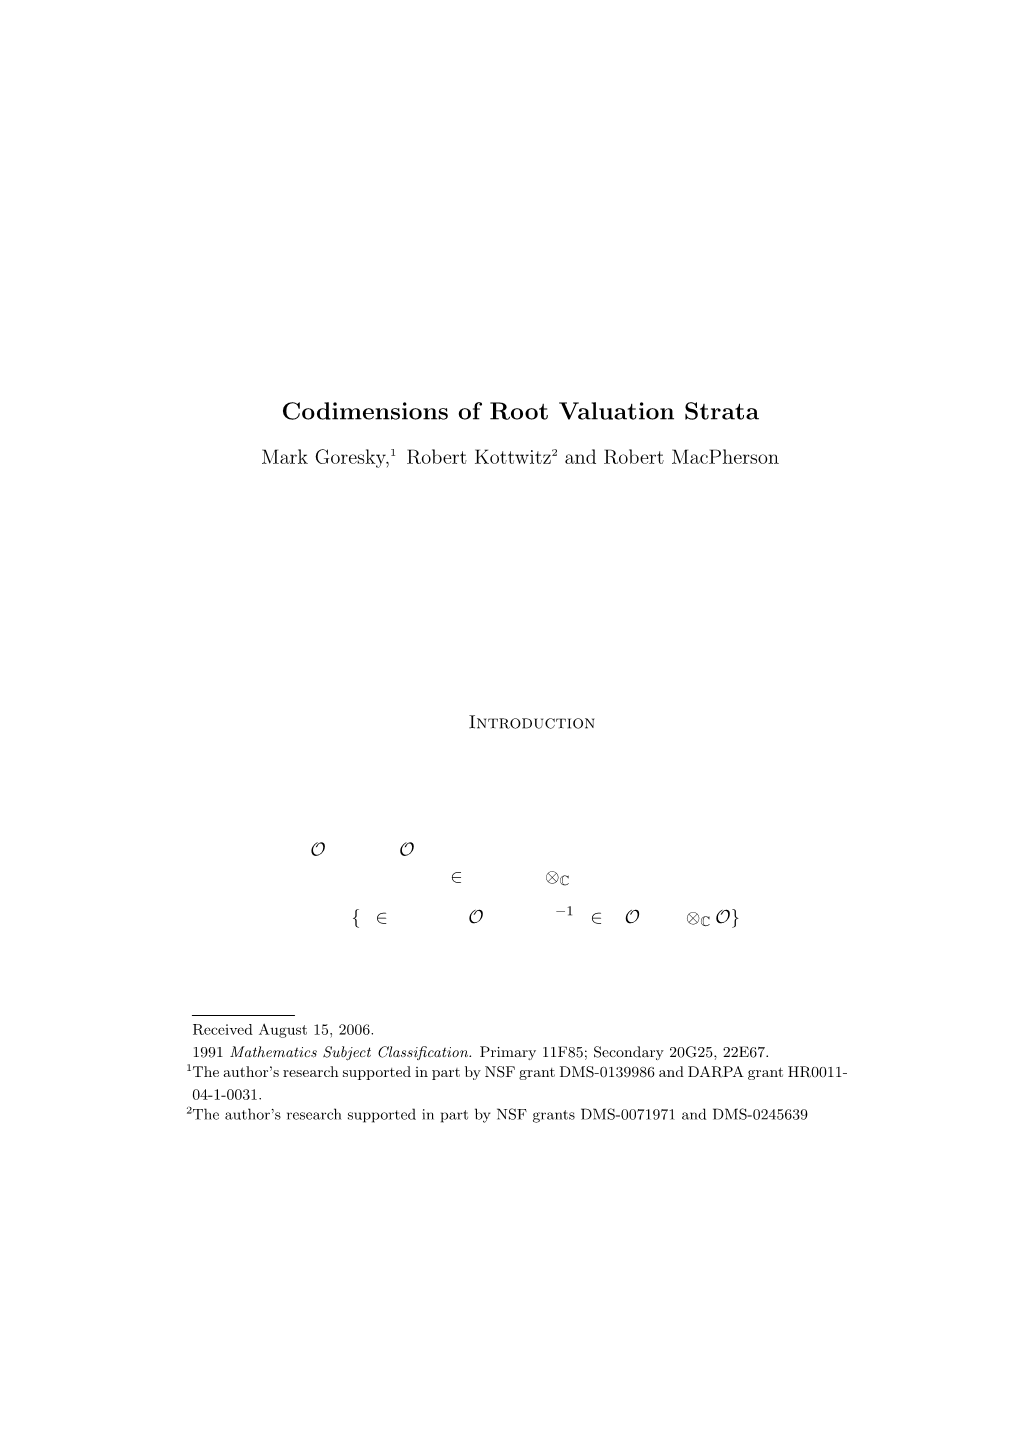 Codimensions of Root Valuation Strata